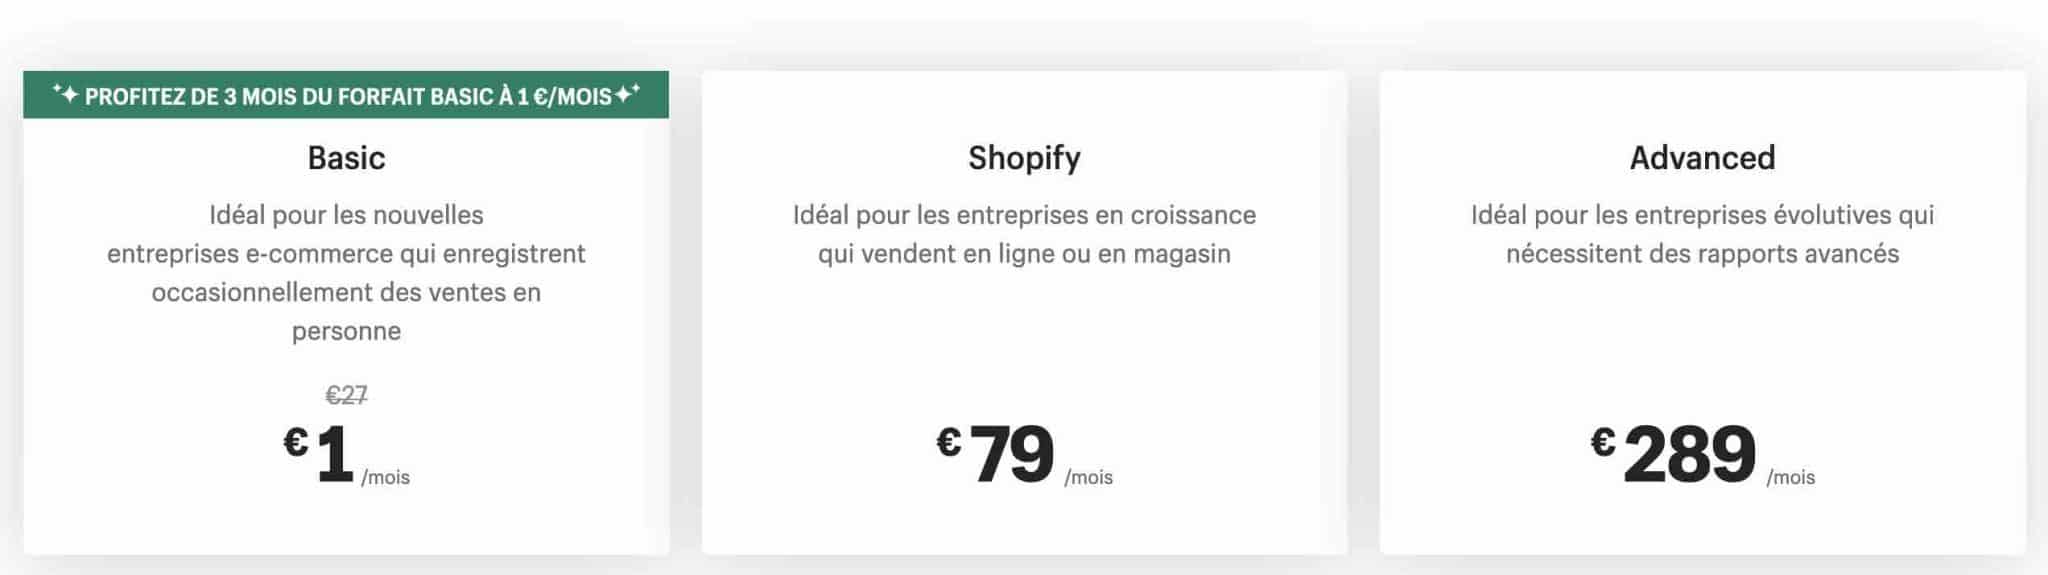 Shopify propose 3 forfaits.